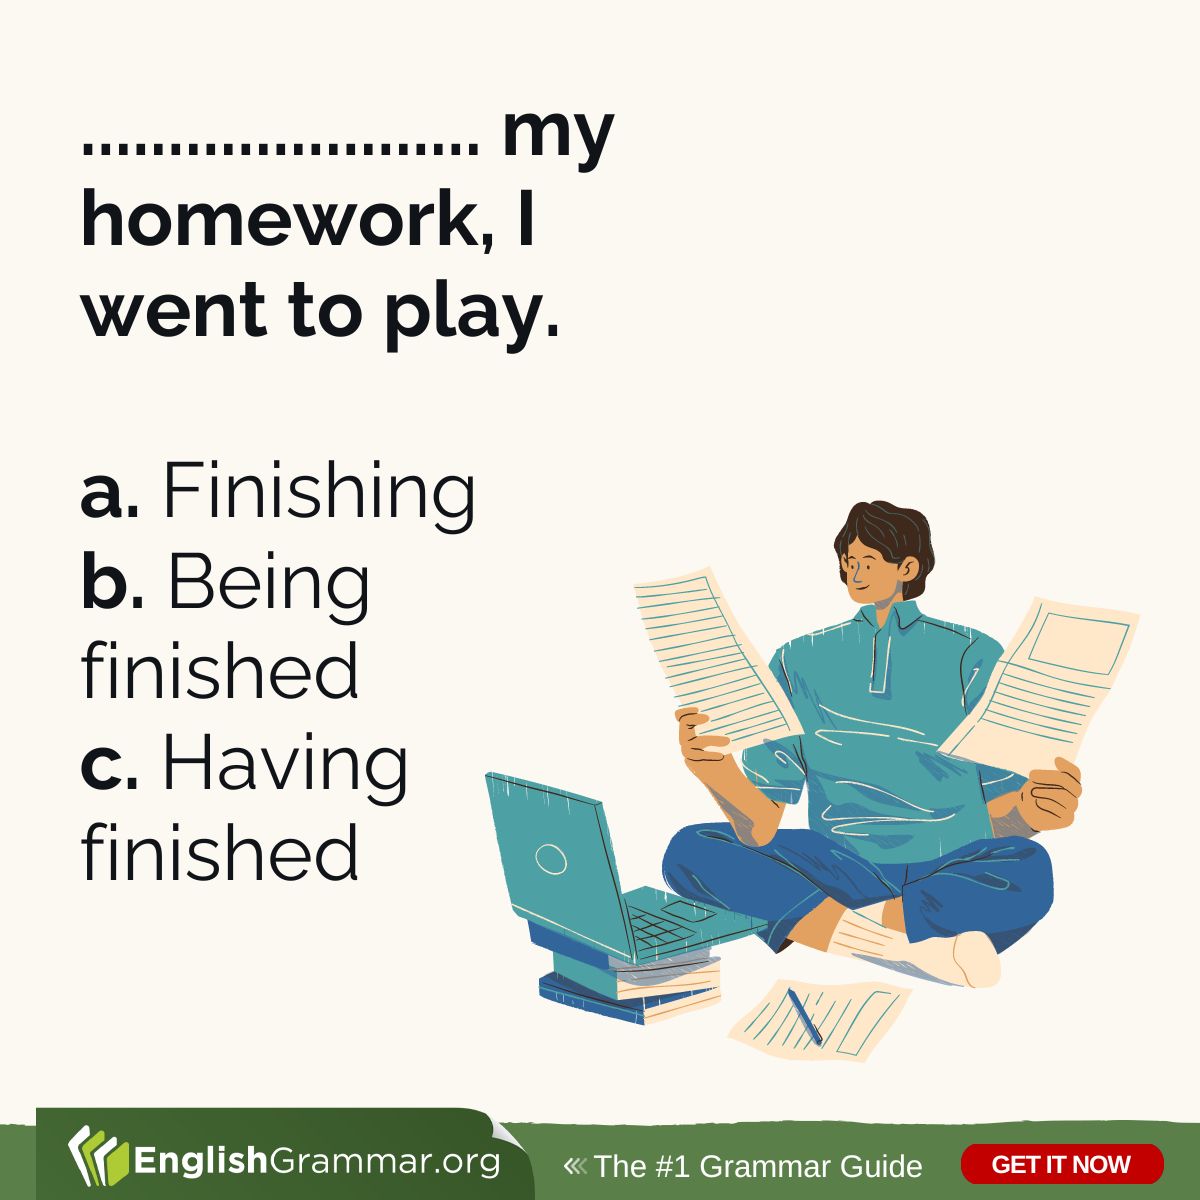 Anyone? Find the right answer here: englishgrammar.org/present-partic… #writing #amwriting #grammar